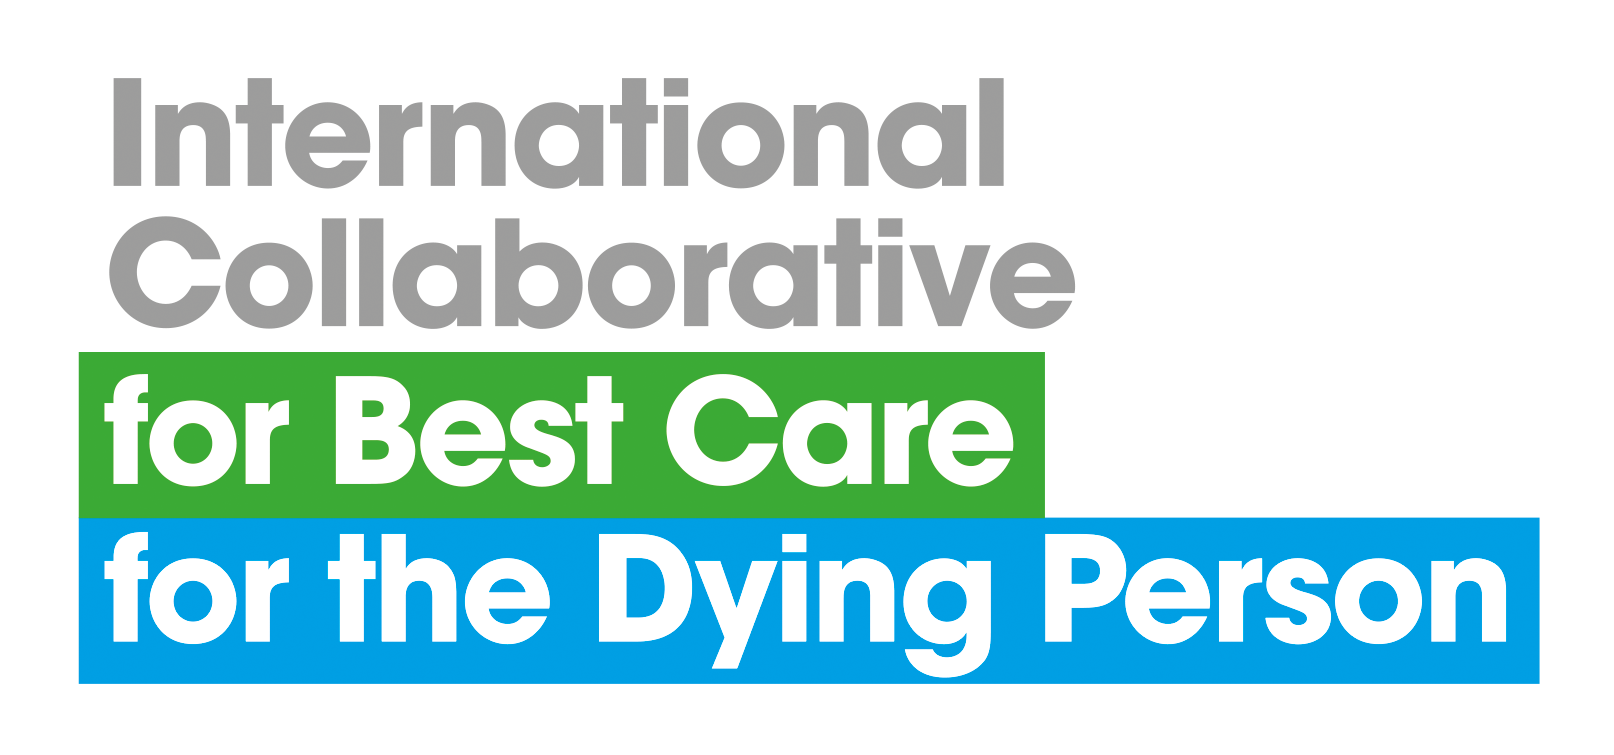 The logo of the International Collaborative for Best Care for the Dying Person